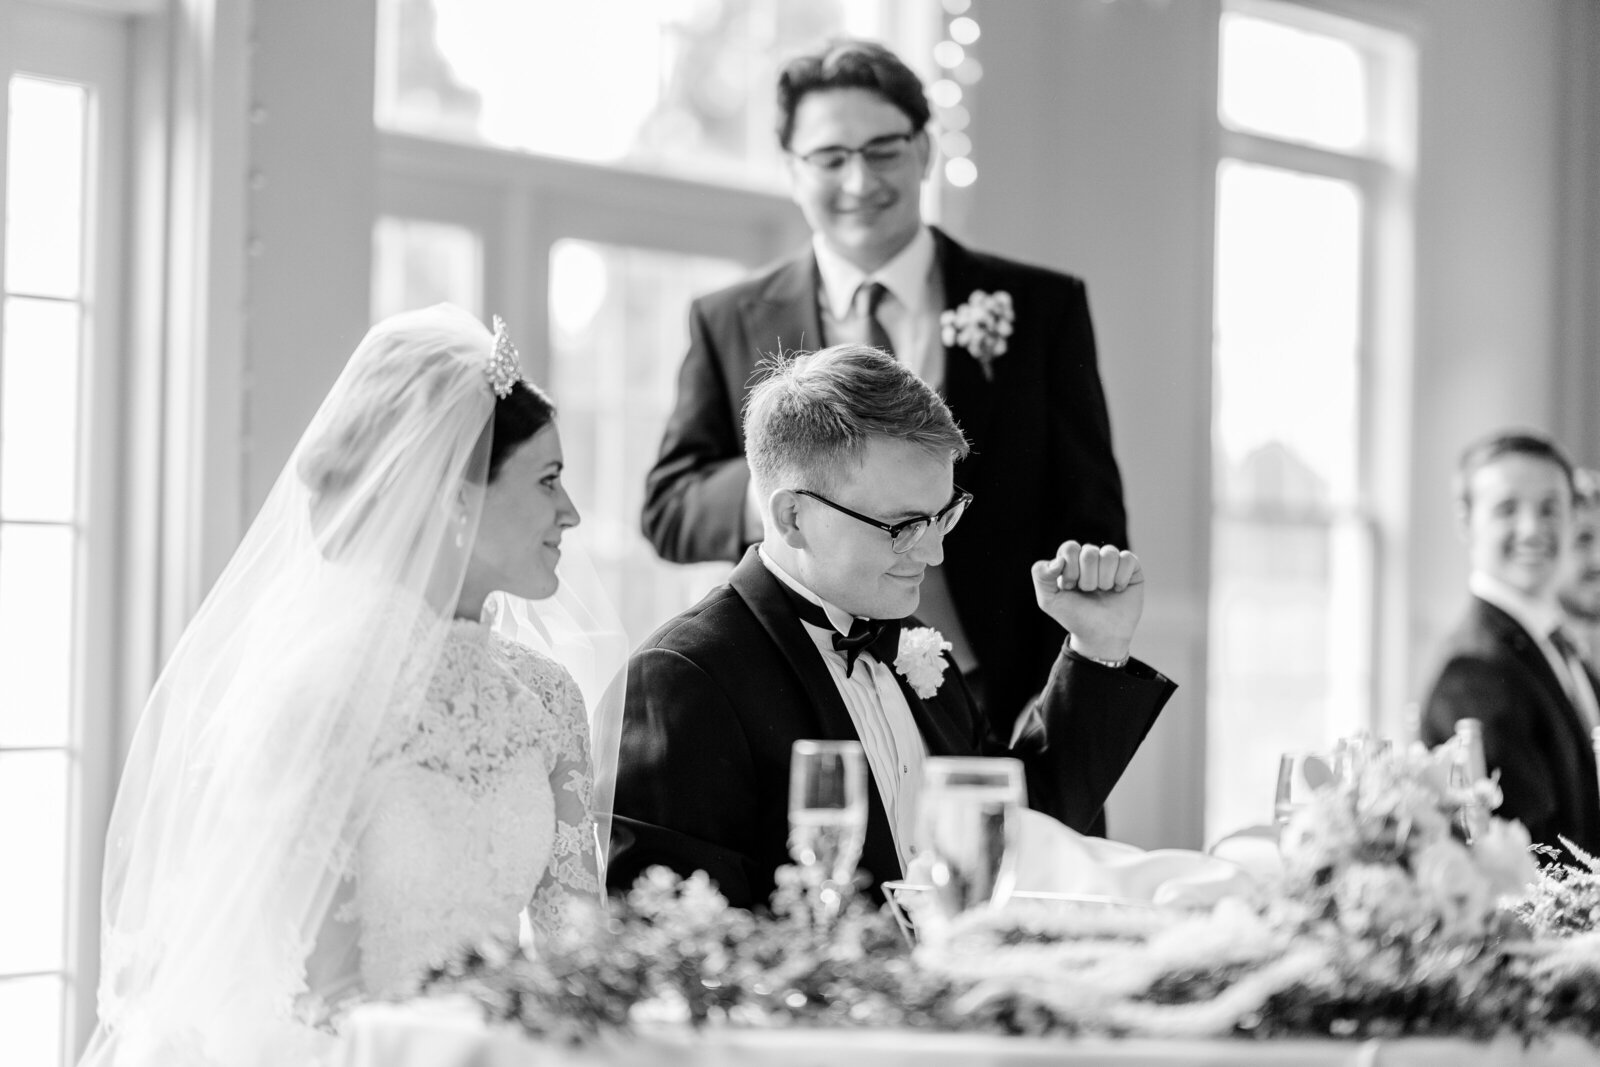 A groom does a fist pump during his best man's toast for his wedding at Westfields Golf Club in Northern Virginia